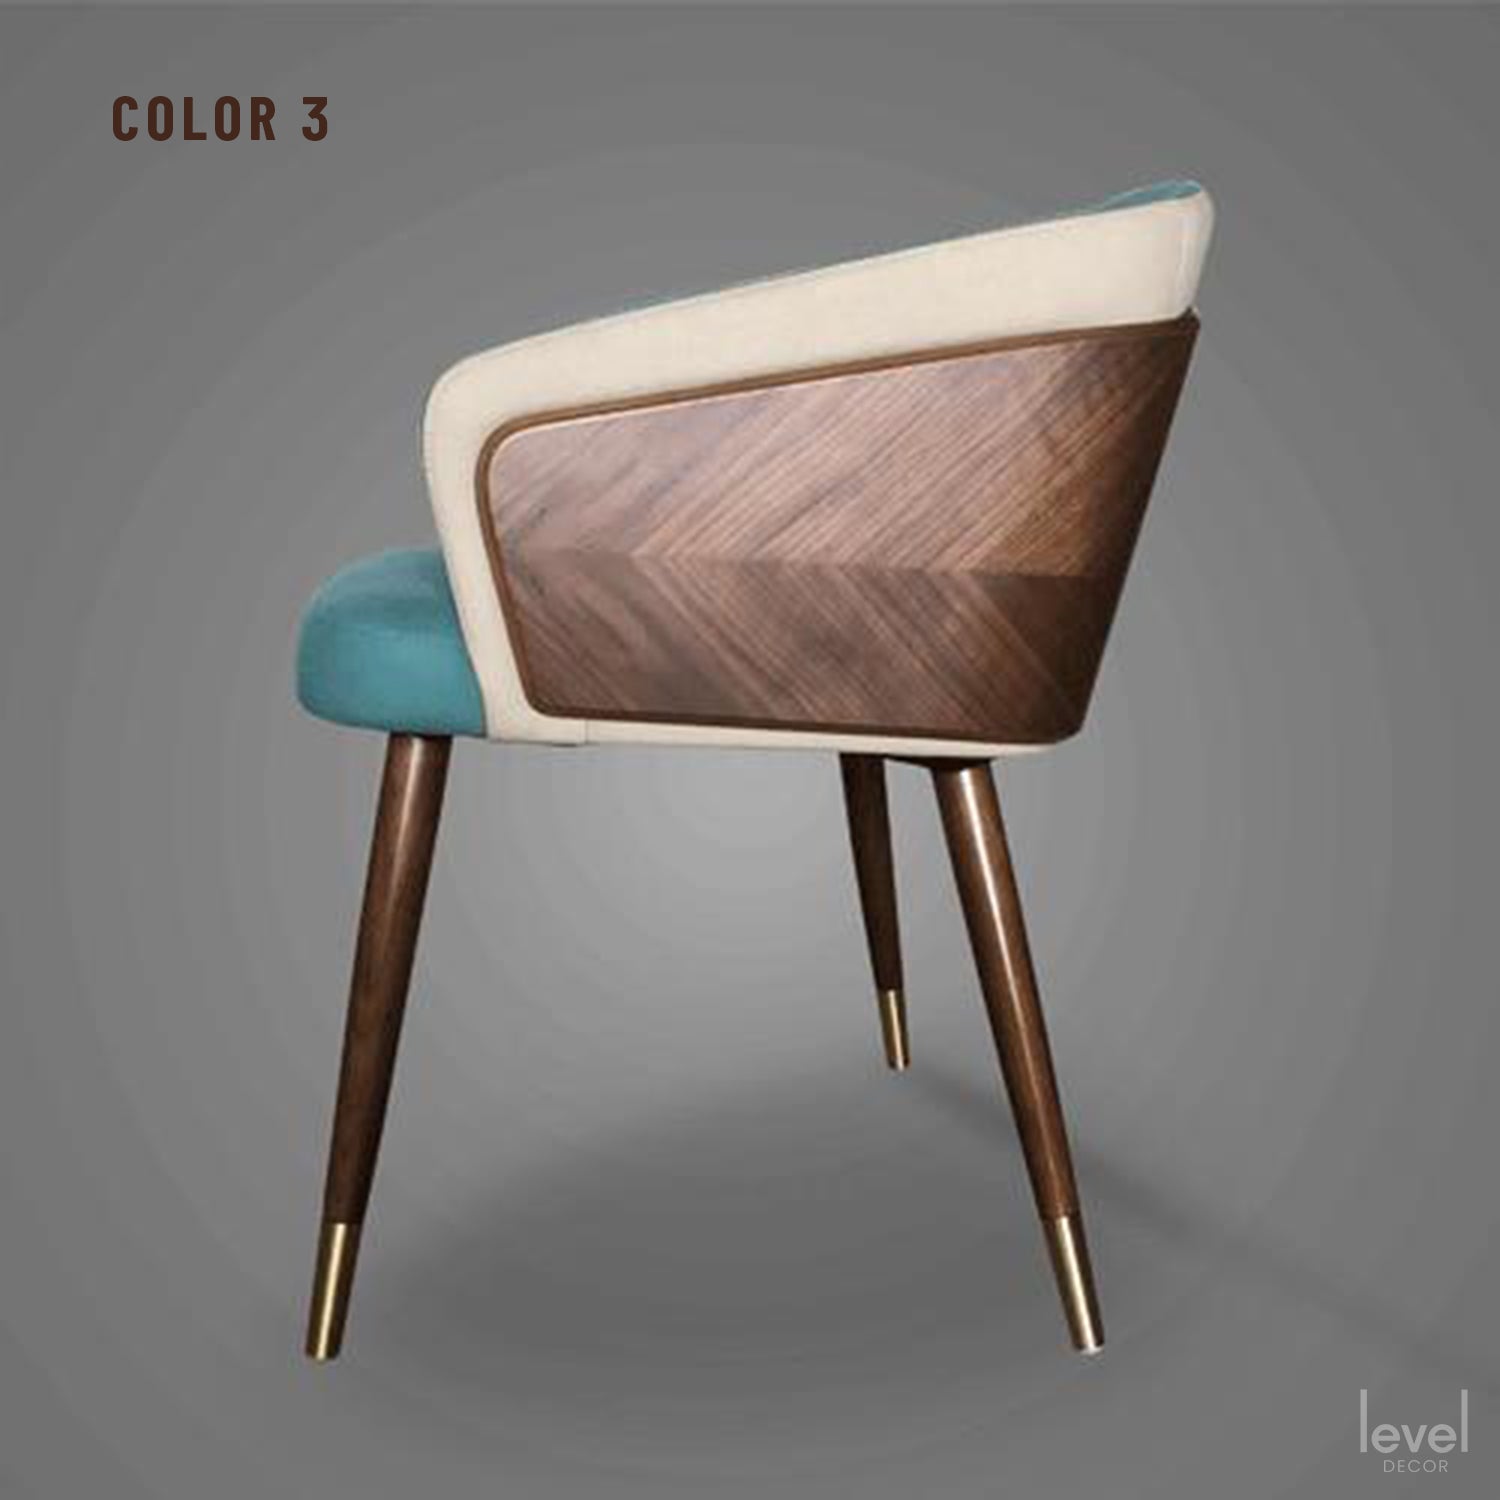 Modern Solid Wood Leisure Chairs - Color 3 - Level Decor